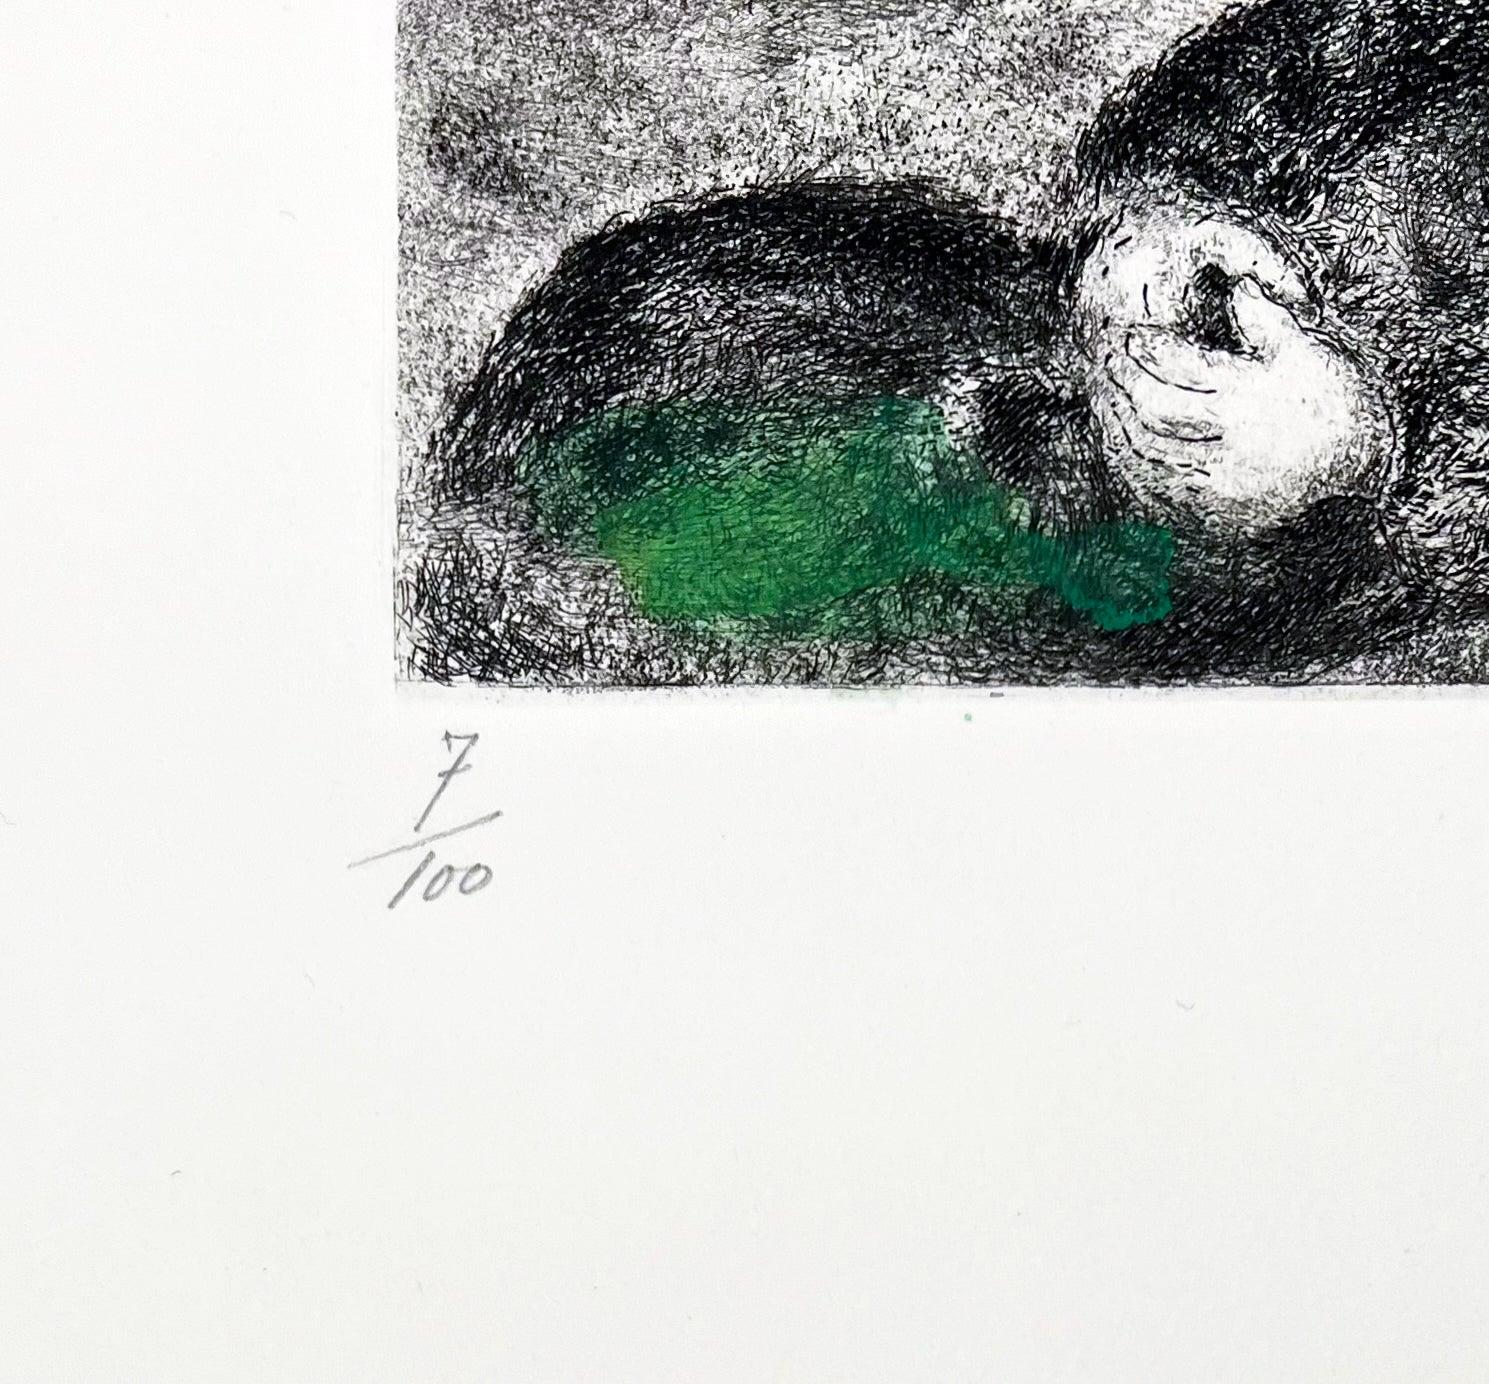 Artist: Marc Chagall
Title: Elijah Touched by an Angel
Portfolio: Signed Bible Etchings with Watercolor
Medium: Etching with watercolor on Arches wove paper
Date: 1958
Edition: 7/100
Frame Size: 22 1/2